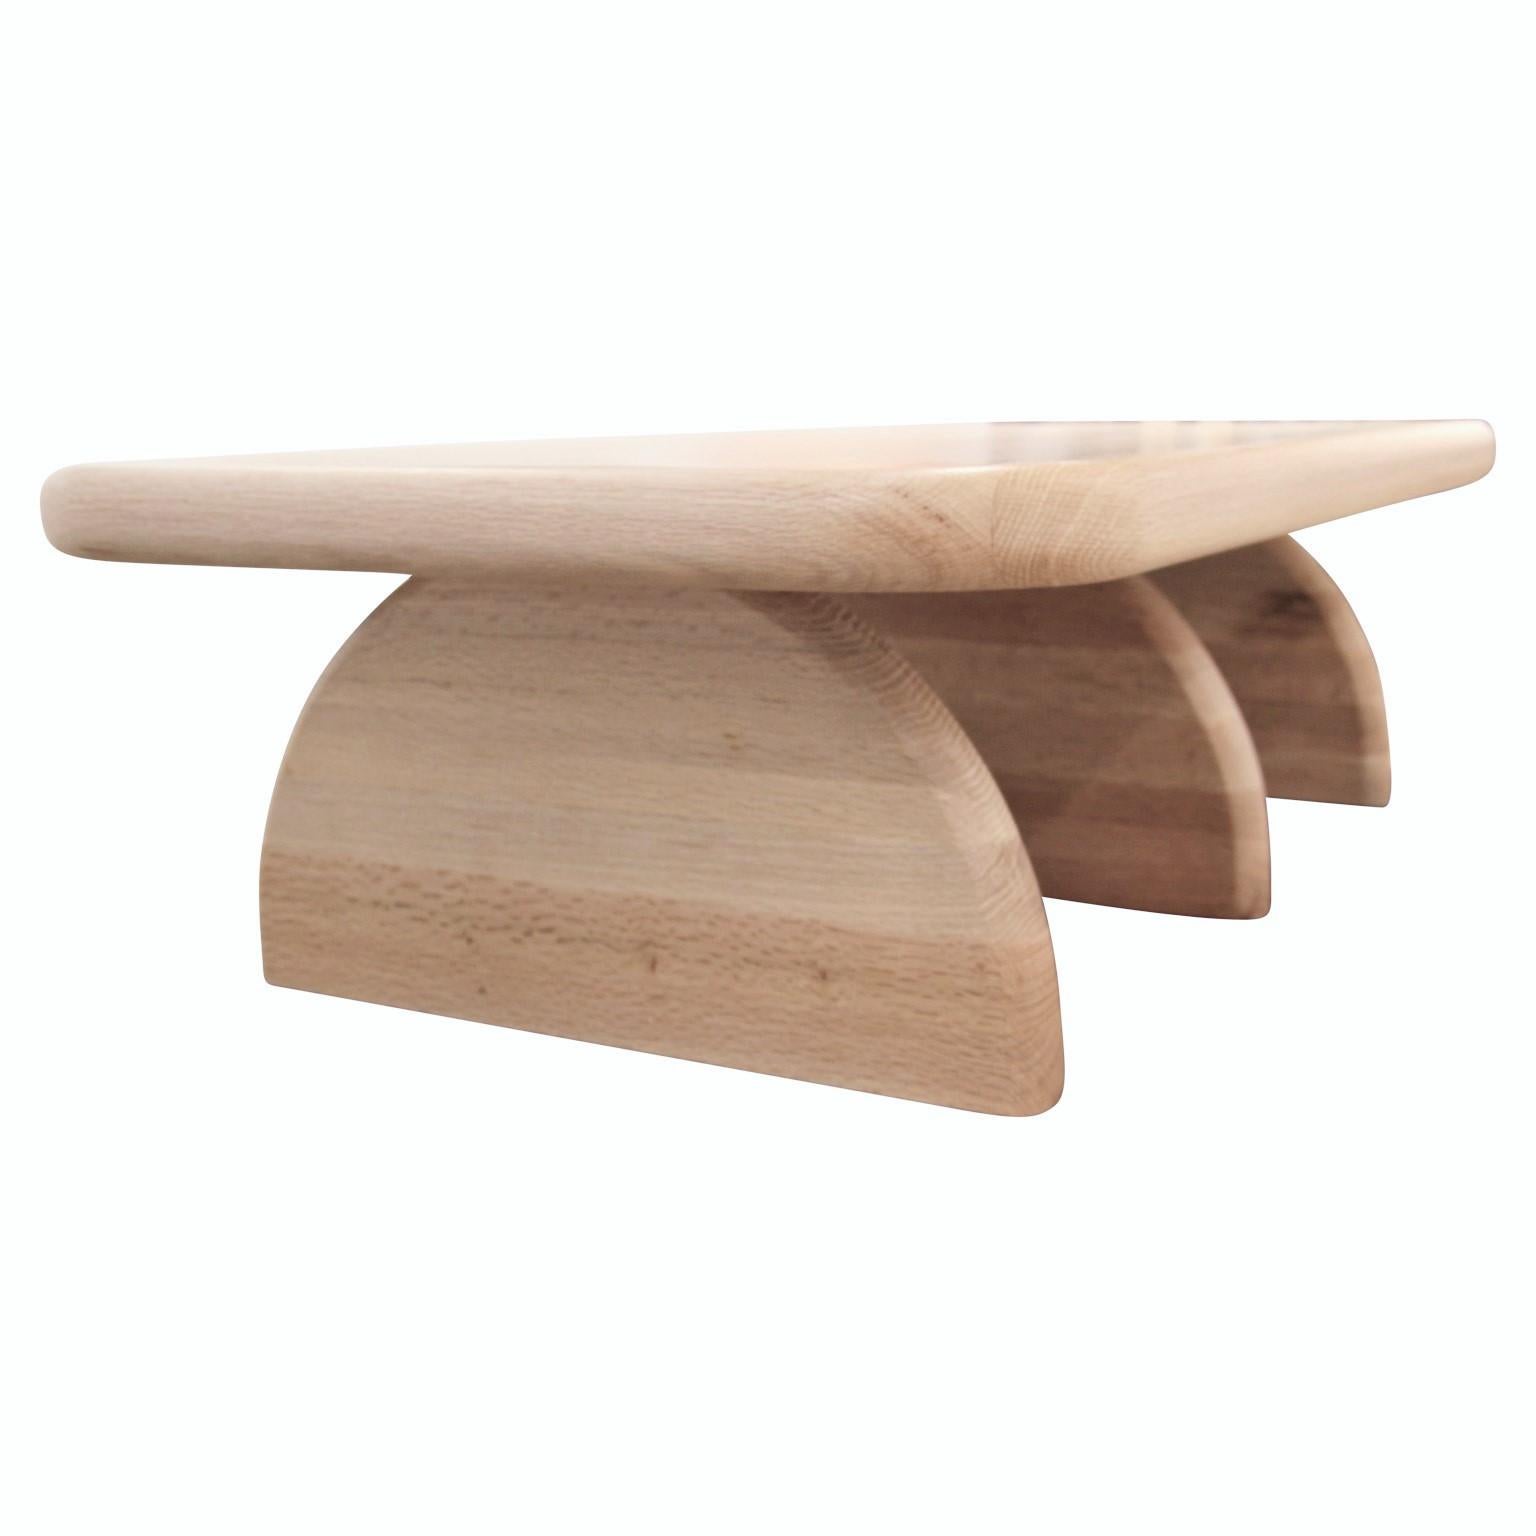 Custom post modern white oak coffee table that is sculpted to create a soft and organic form. The table has a clear finish that accentuates the oak's grain pattern.